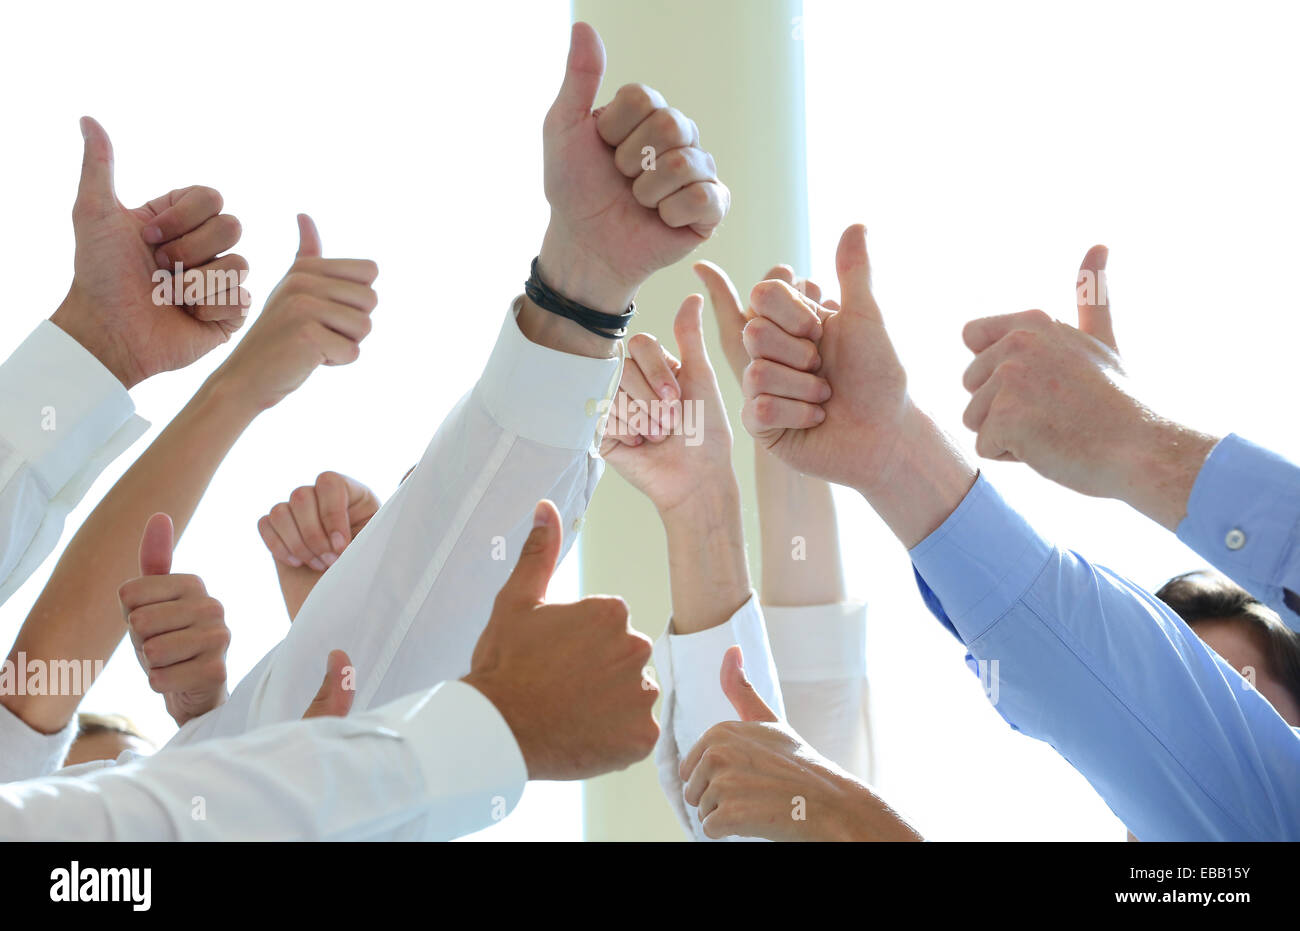 achievement adult approval arm Basque Country business businessman businesspeople businesswoman center close-up collaboration Stock Photo